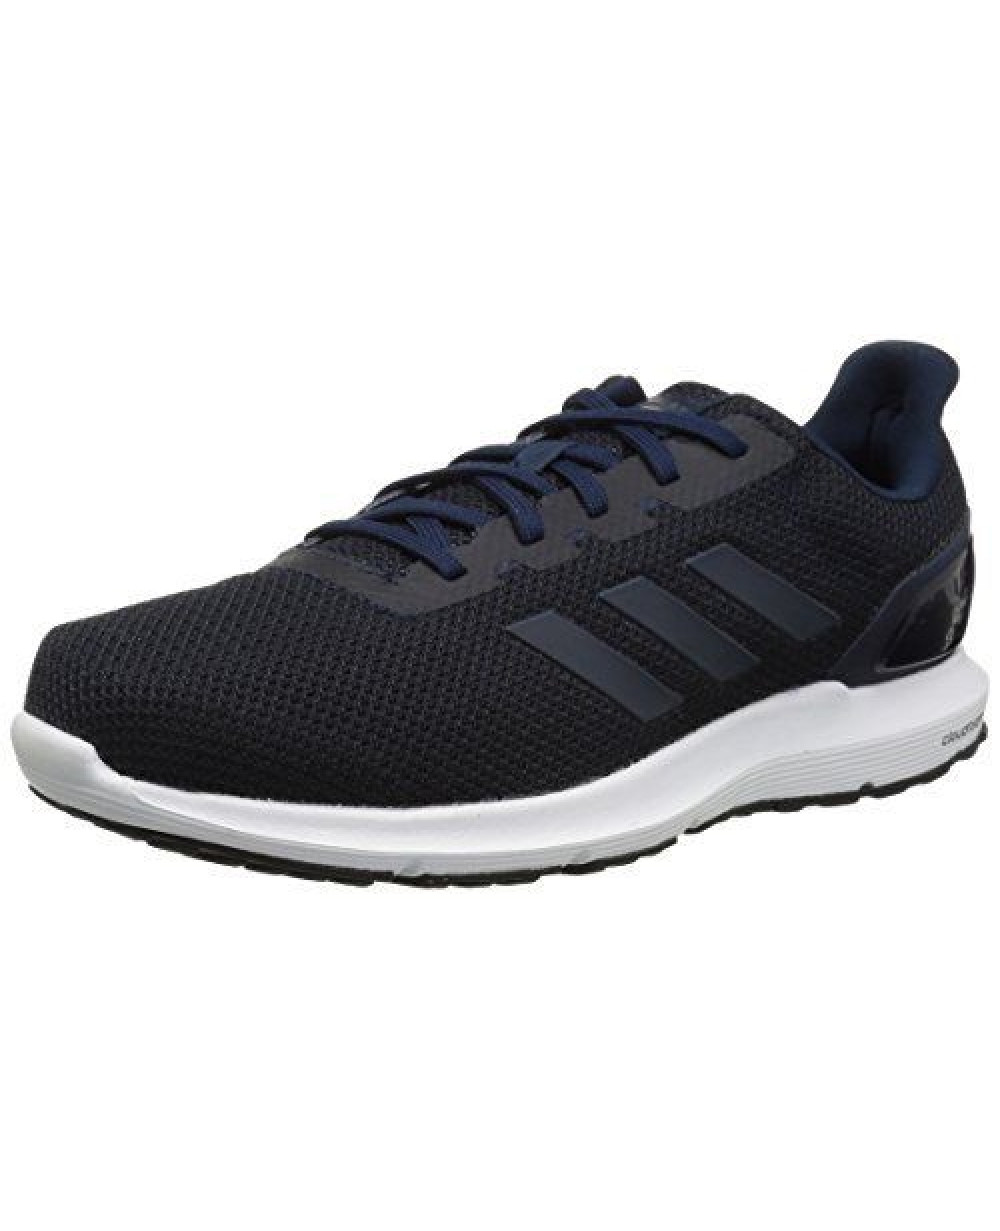 bypass pizza Laugh Adidas Cosmic 2 Running Navy Shoes Men DB1757